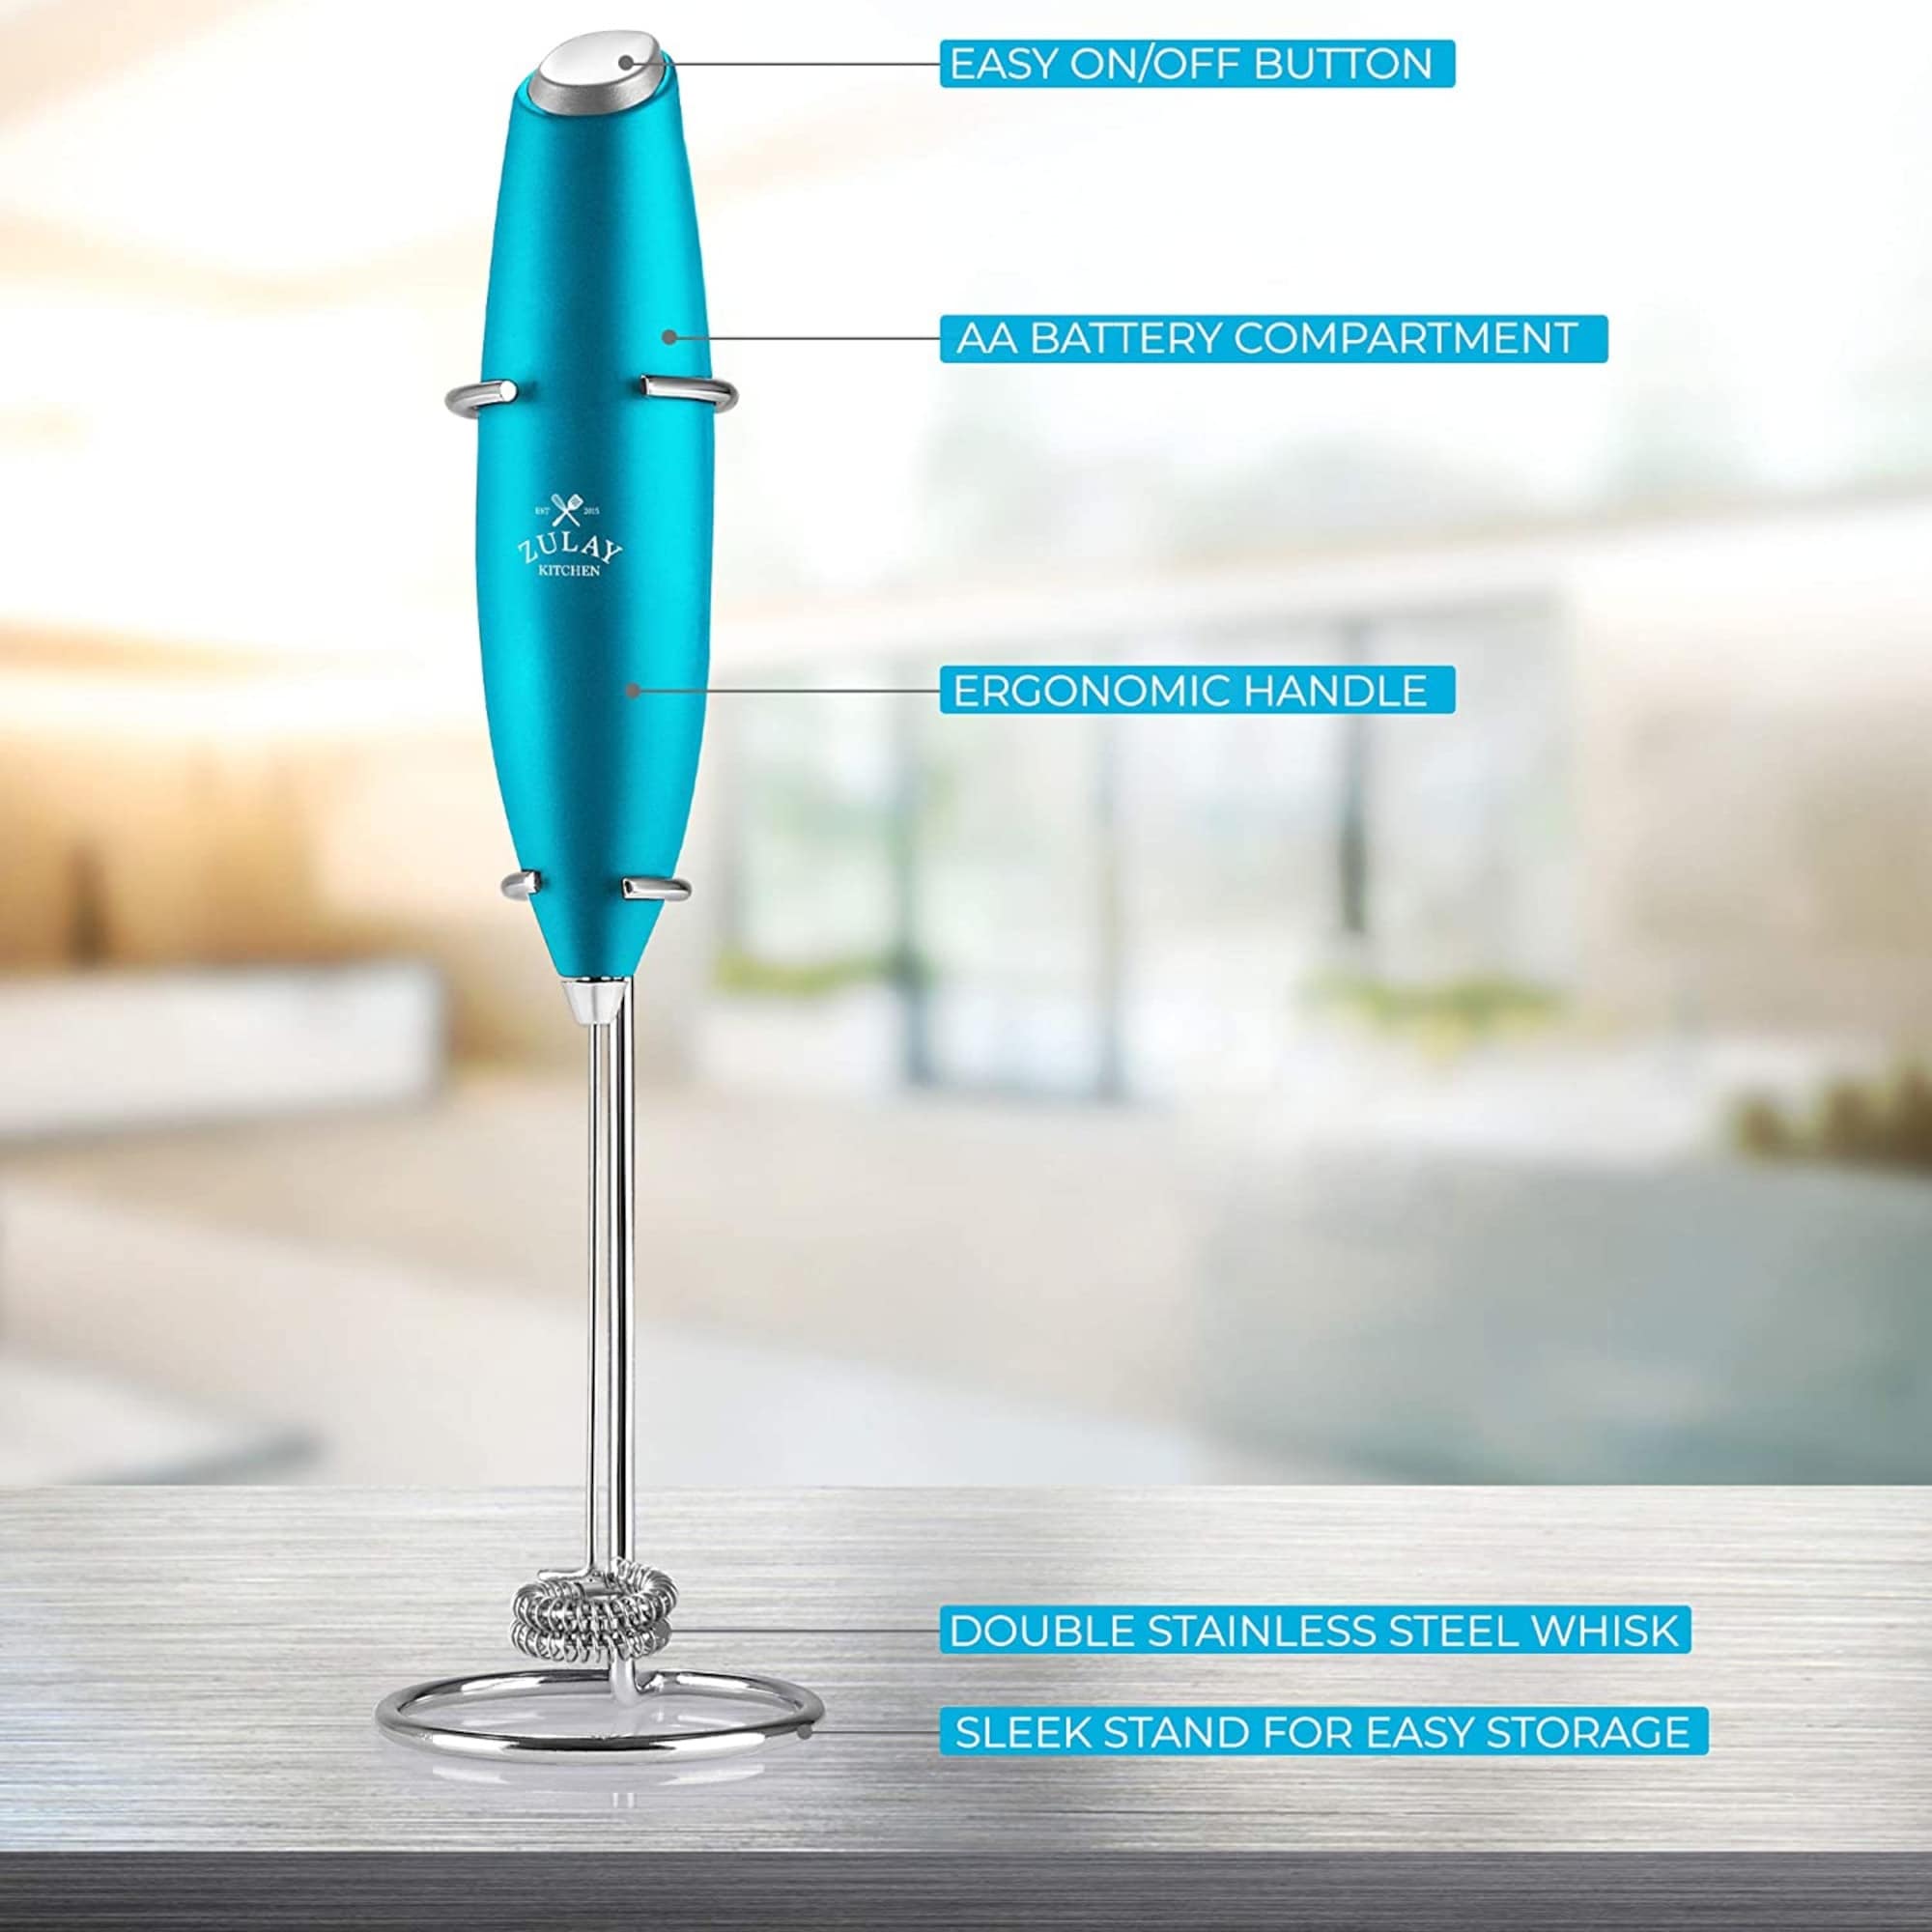 Zulay Double Whisk Milk Frother Handheld Mixer - Teal - Bed Bath & Beyond -  33867705